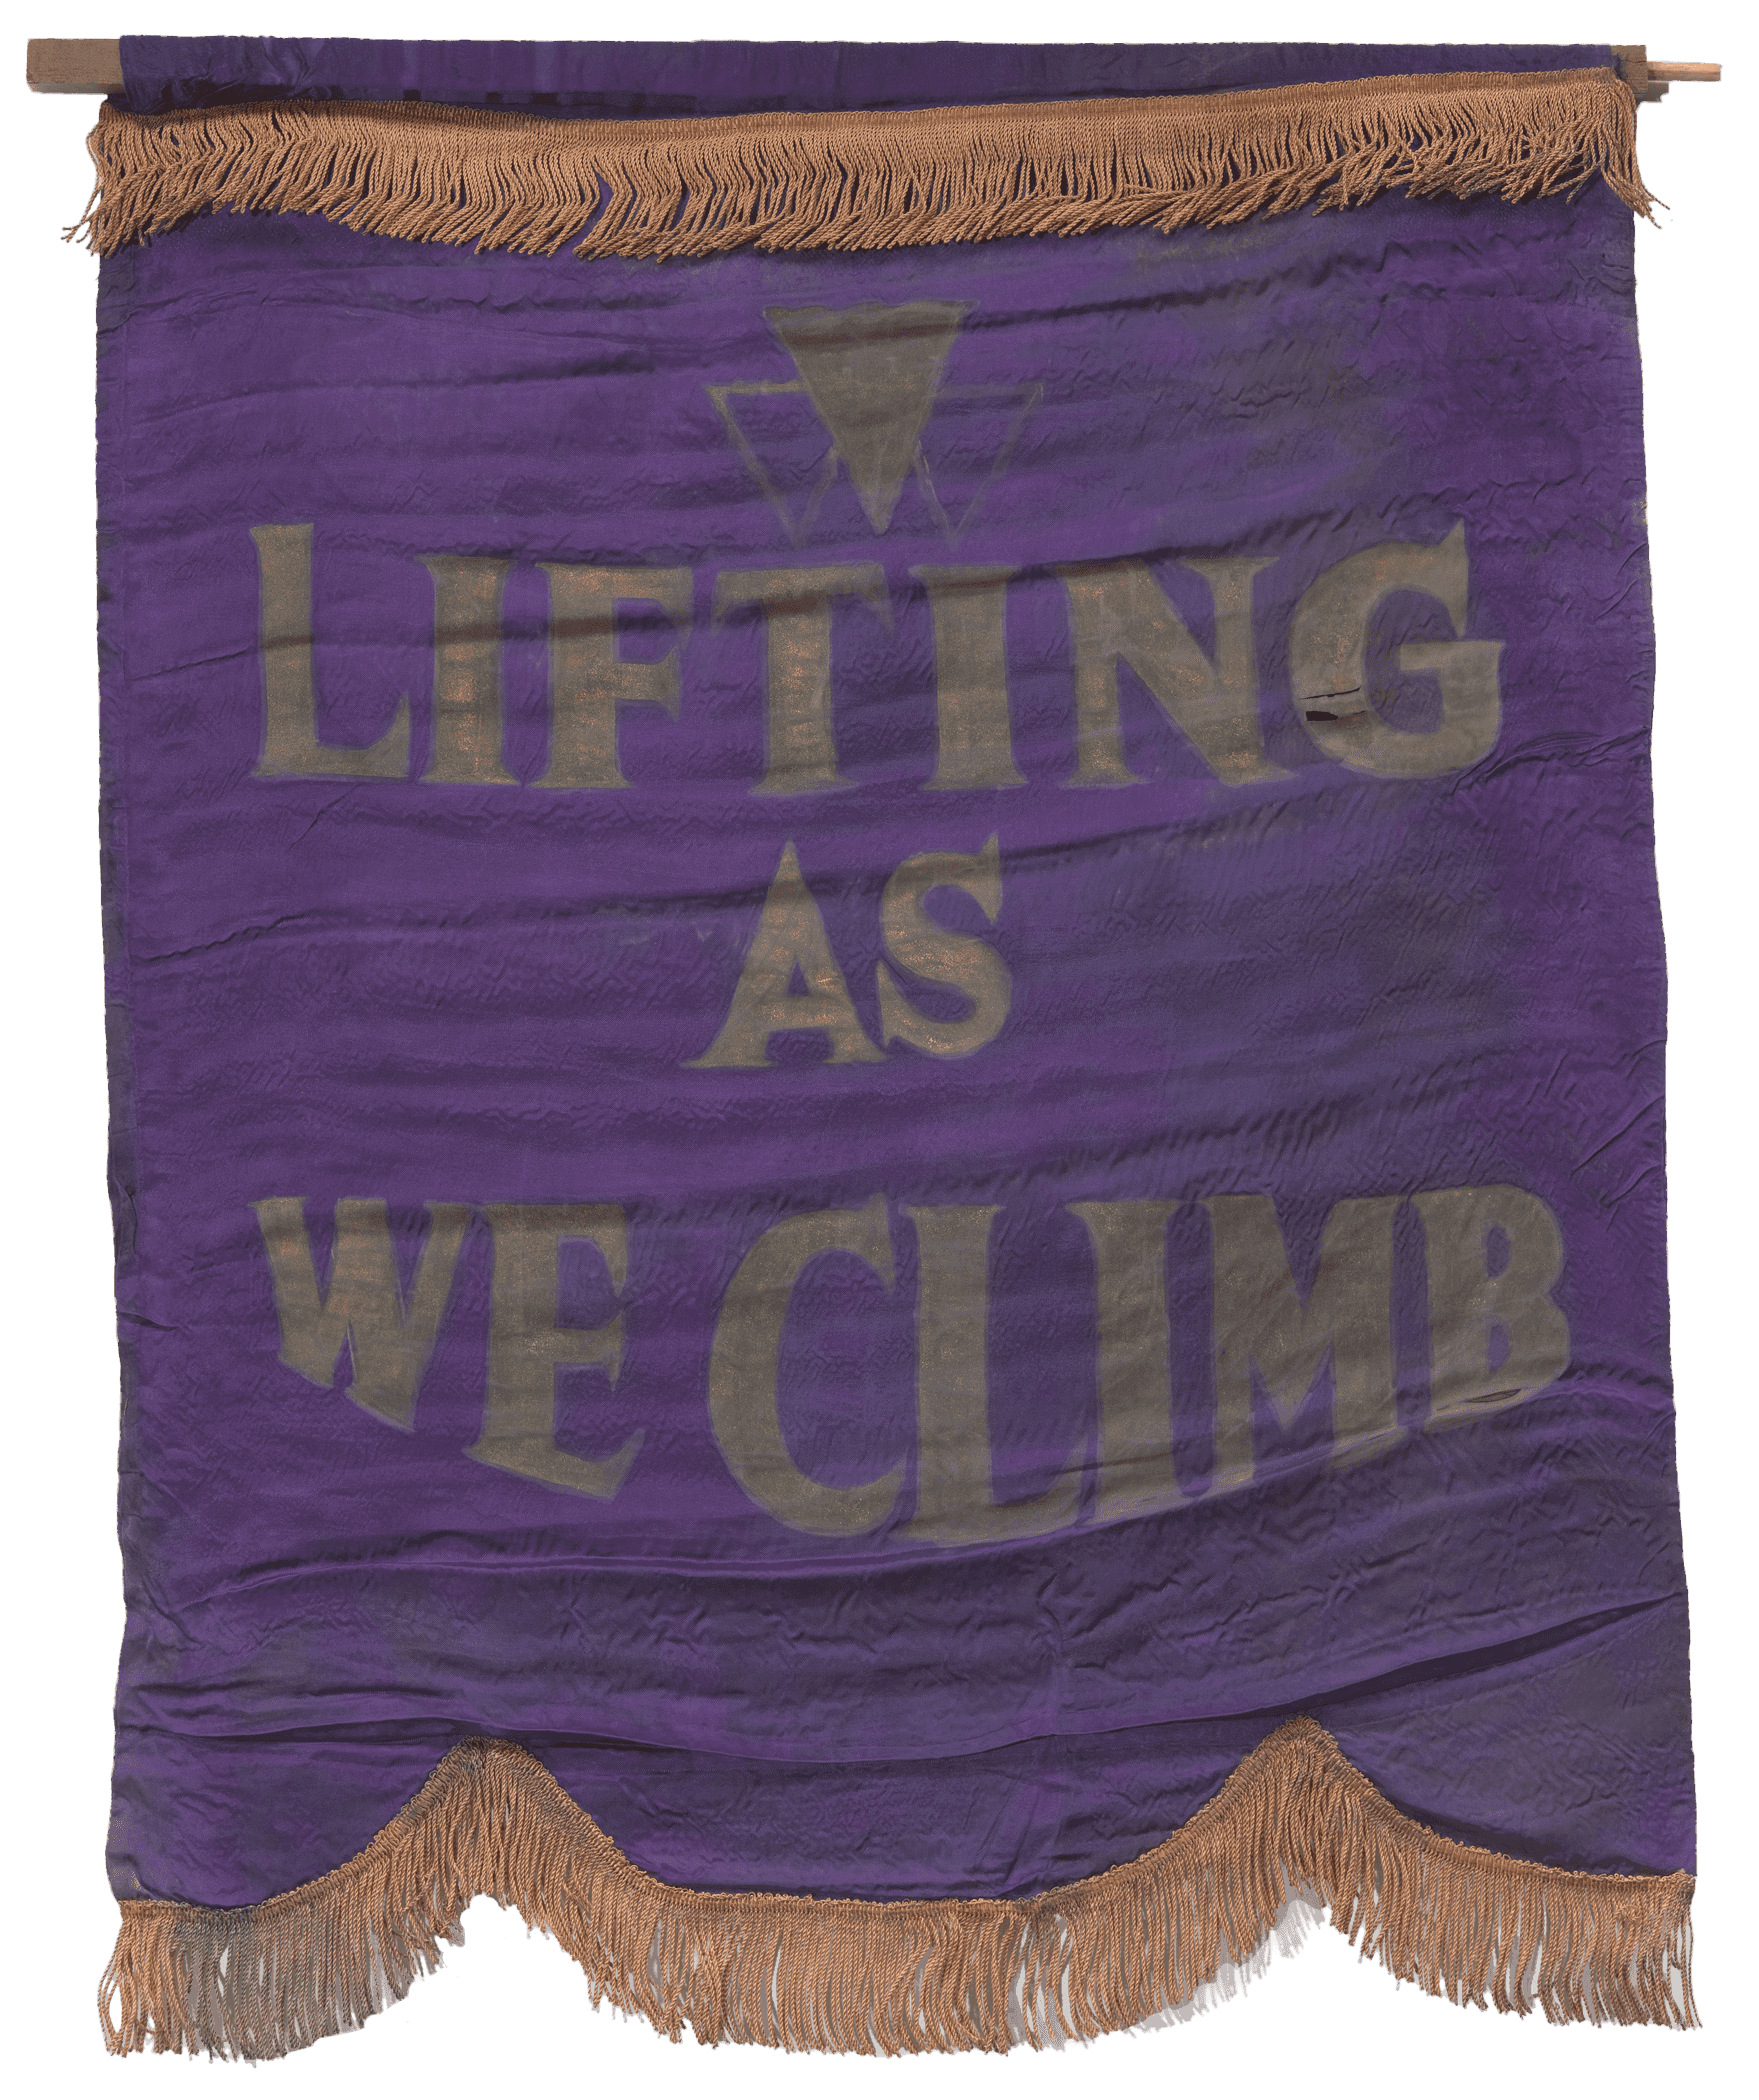 A purple silk banner with gold fringe and the National Association of Colored Women’s Clubs' motto, "LIFTING / AS / WE CLIMB" painted in large gold letters.